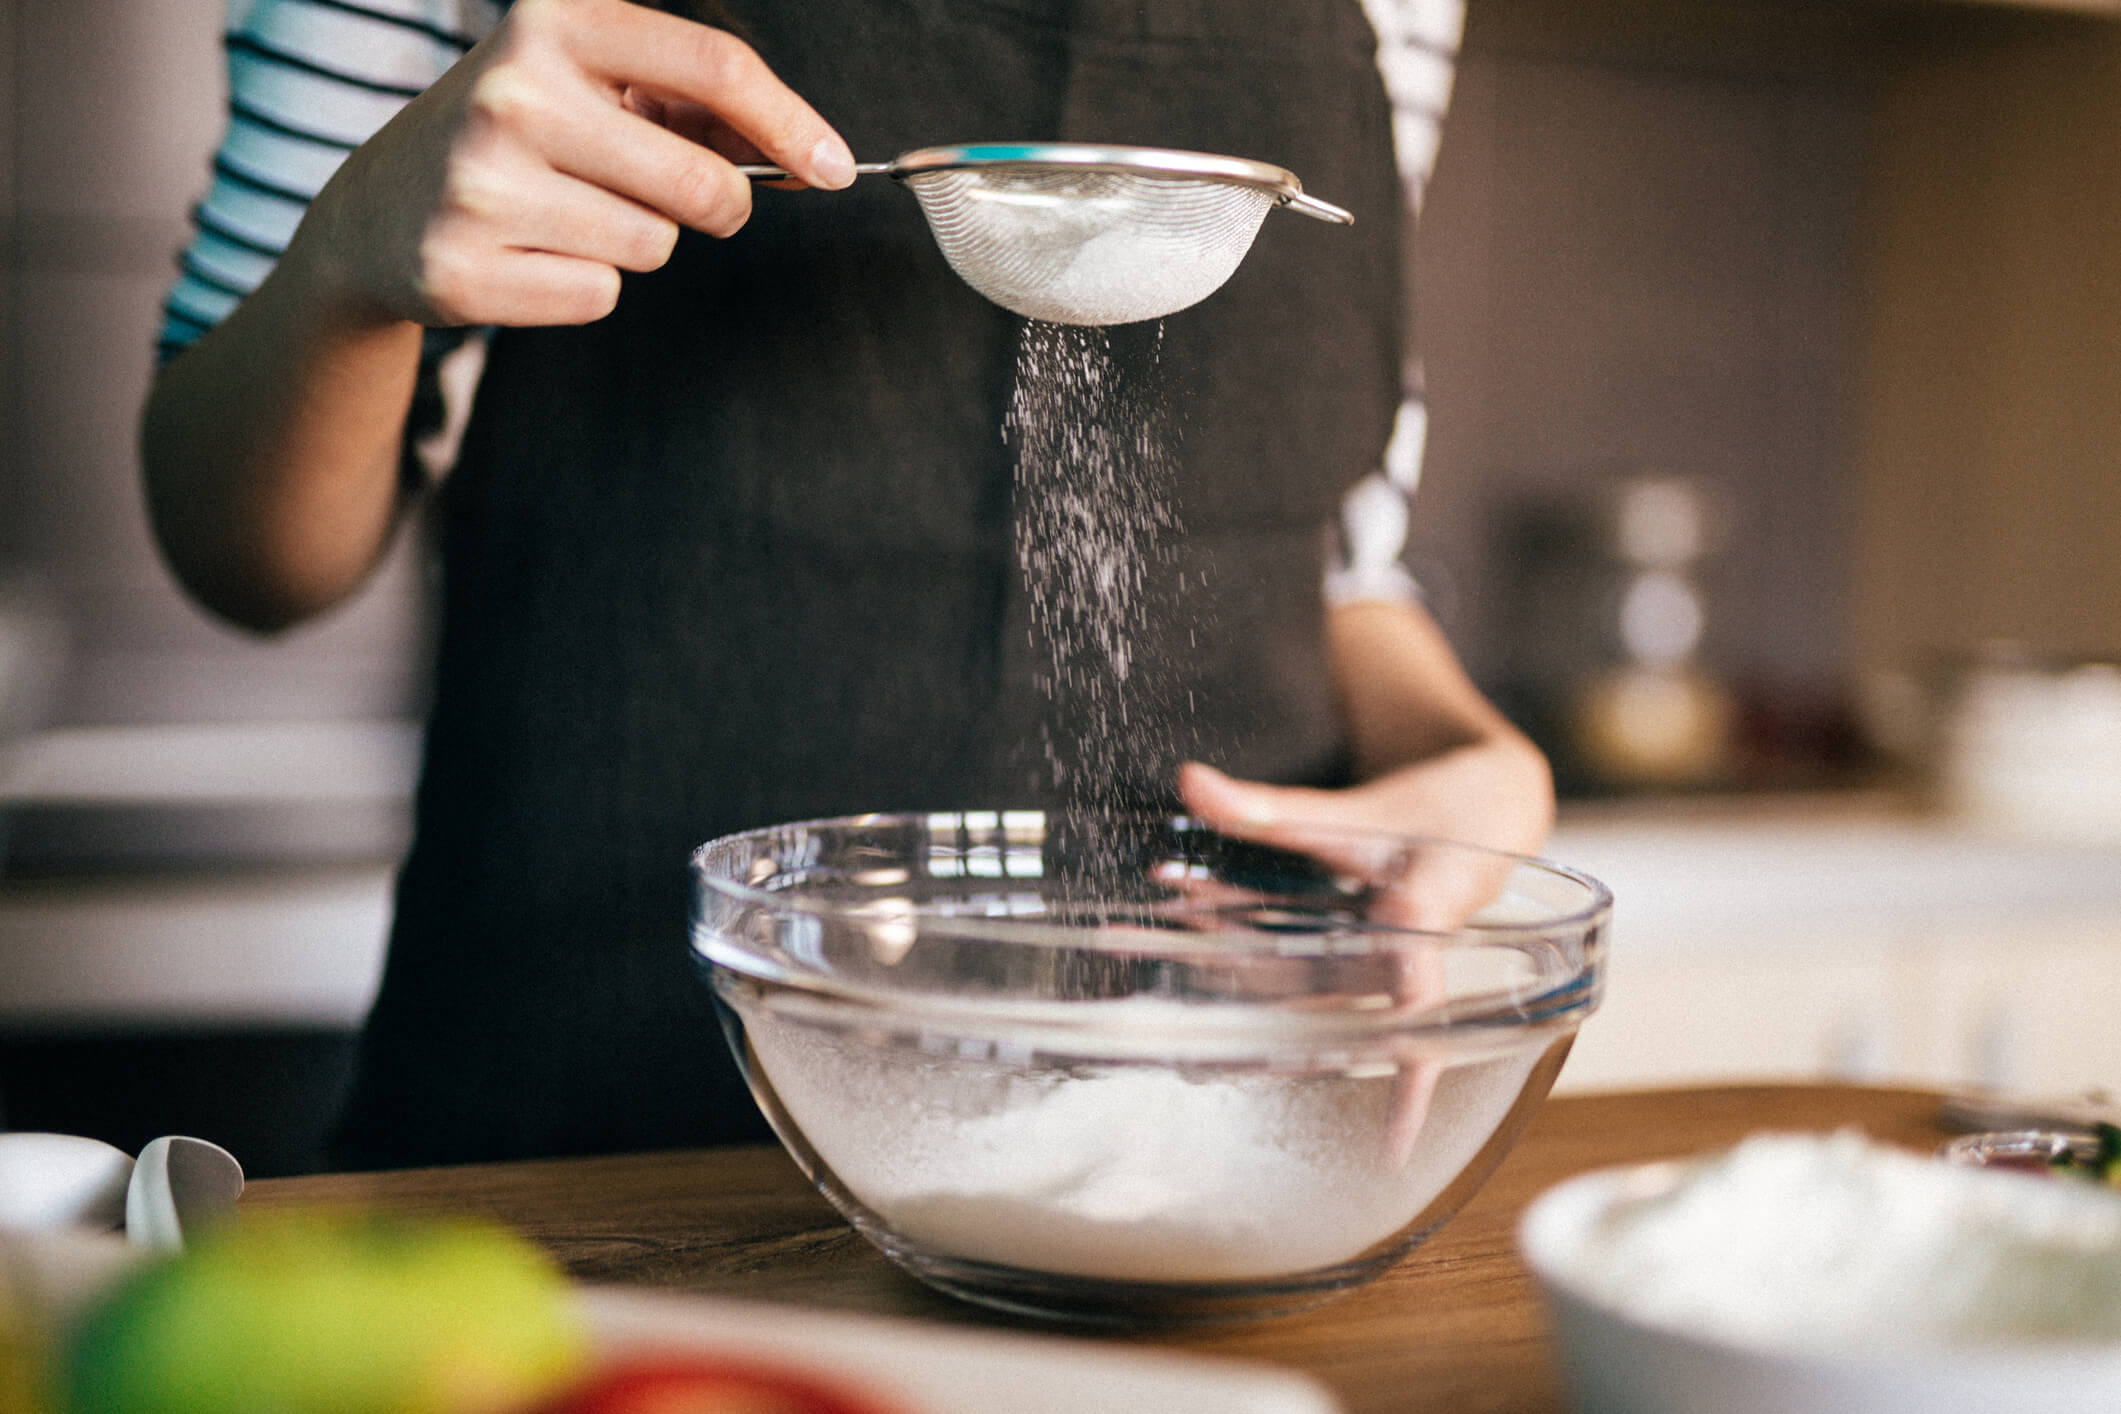 Sifting dry ingredients into a bowl while baking